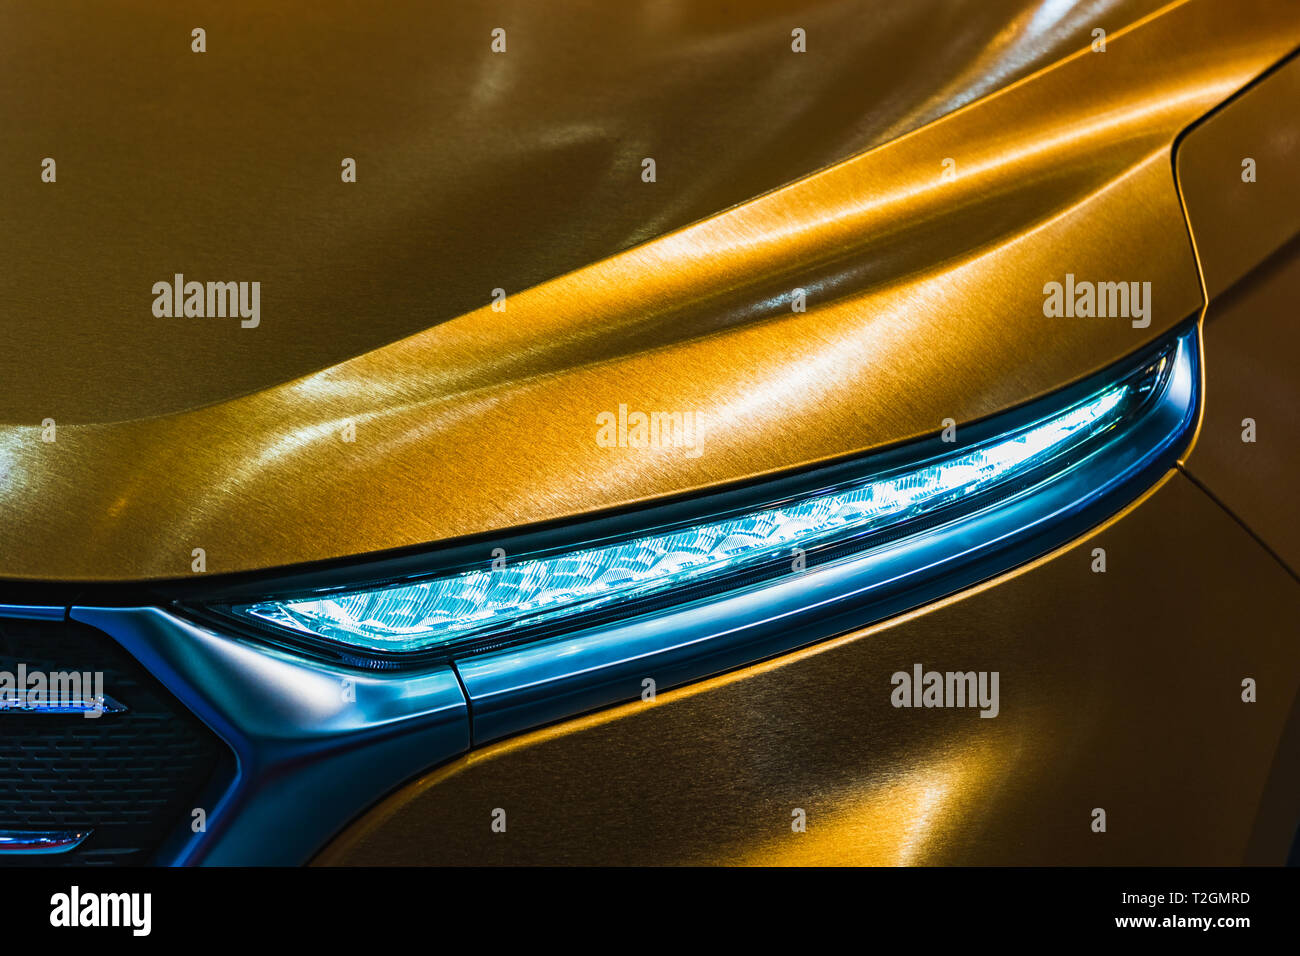 Close up detail shot of headlight of modern luxury sports car. Front view of supercar. Motor sport background concept. Stock Photo